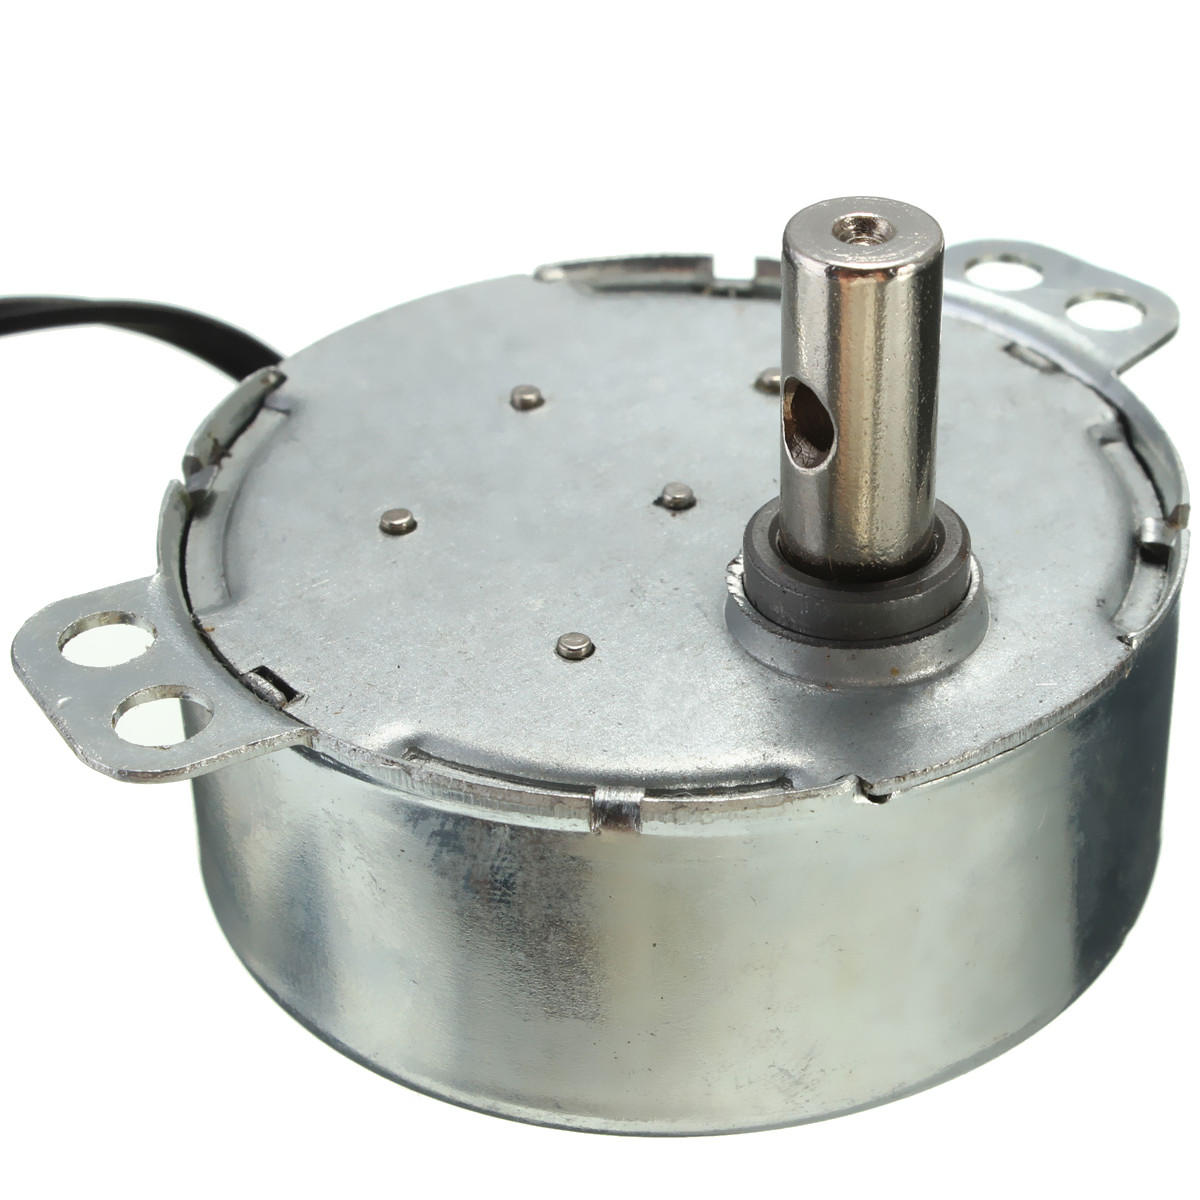 CW//CCW Microwave Turntable Turn Table Synchronous Motor TYJ50-8A7D Shaft 4RPM SP